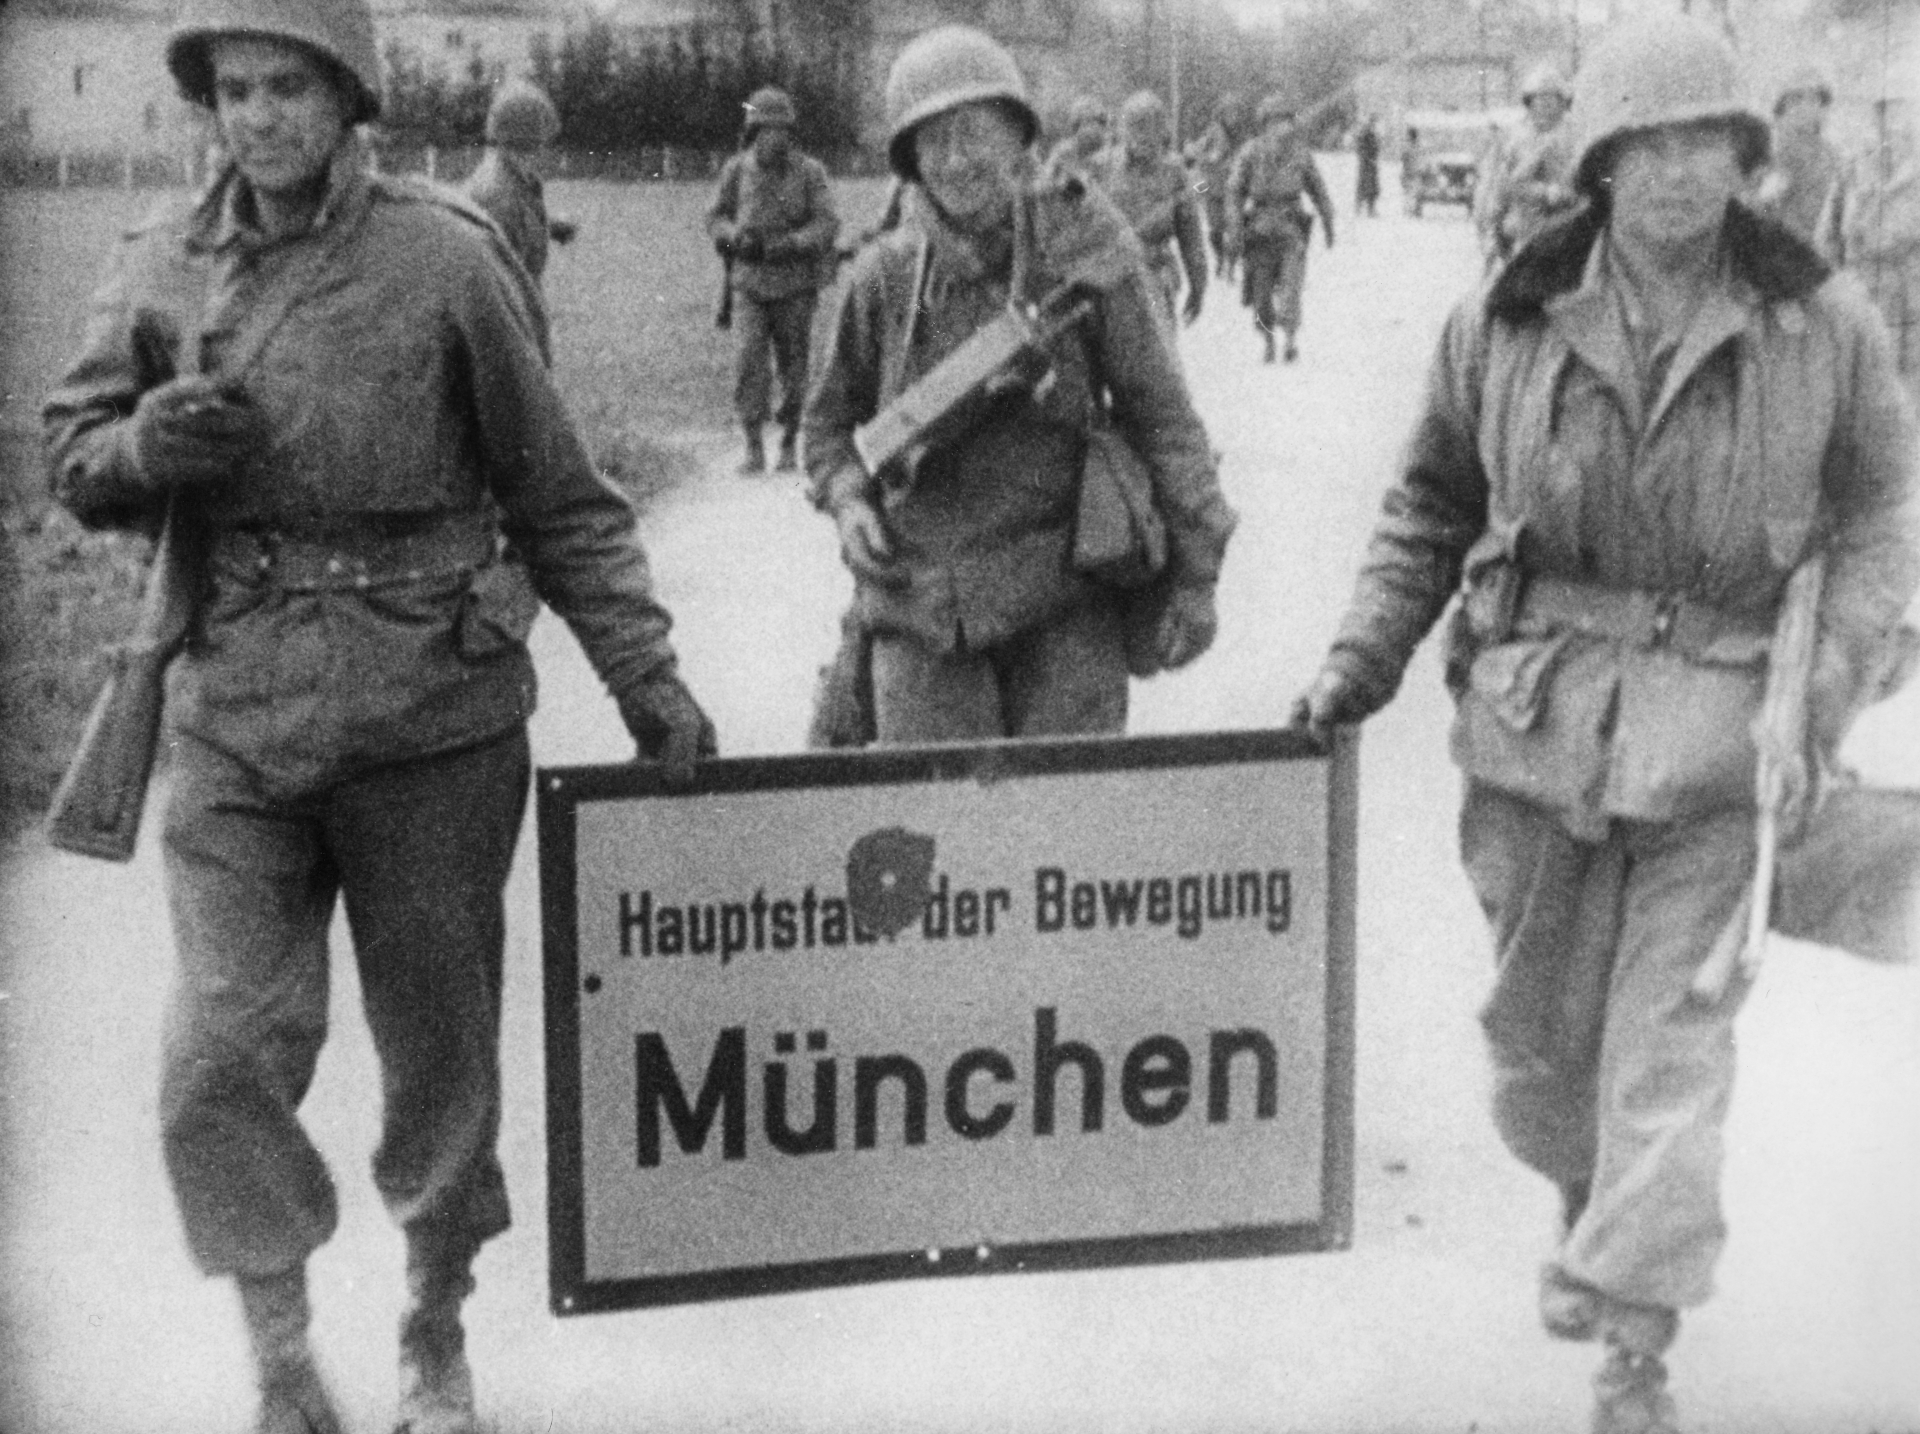 Three armed soldiers walking along a road carrying a place-name sign with the title “Capital of the Movement. Munich”